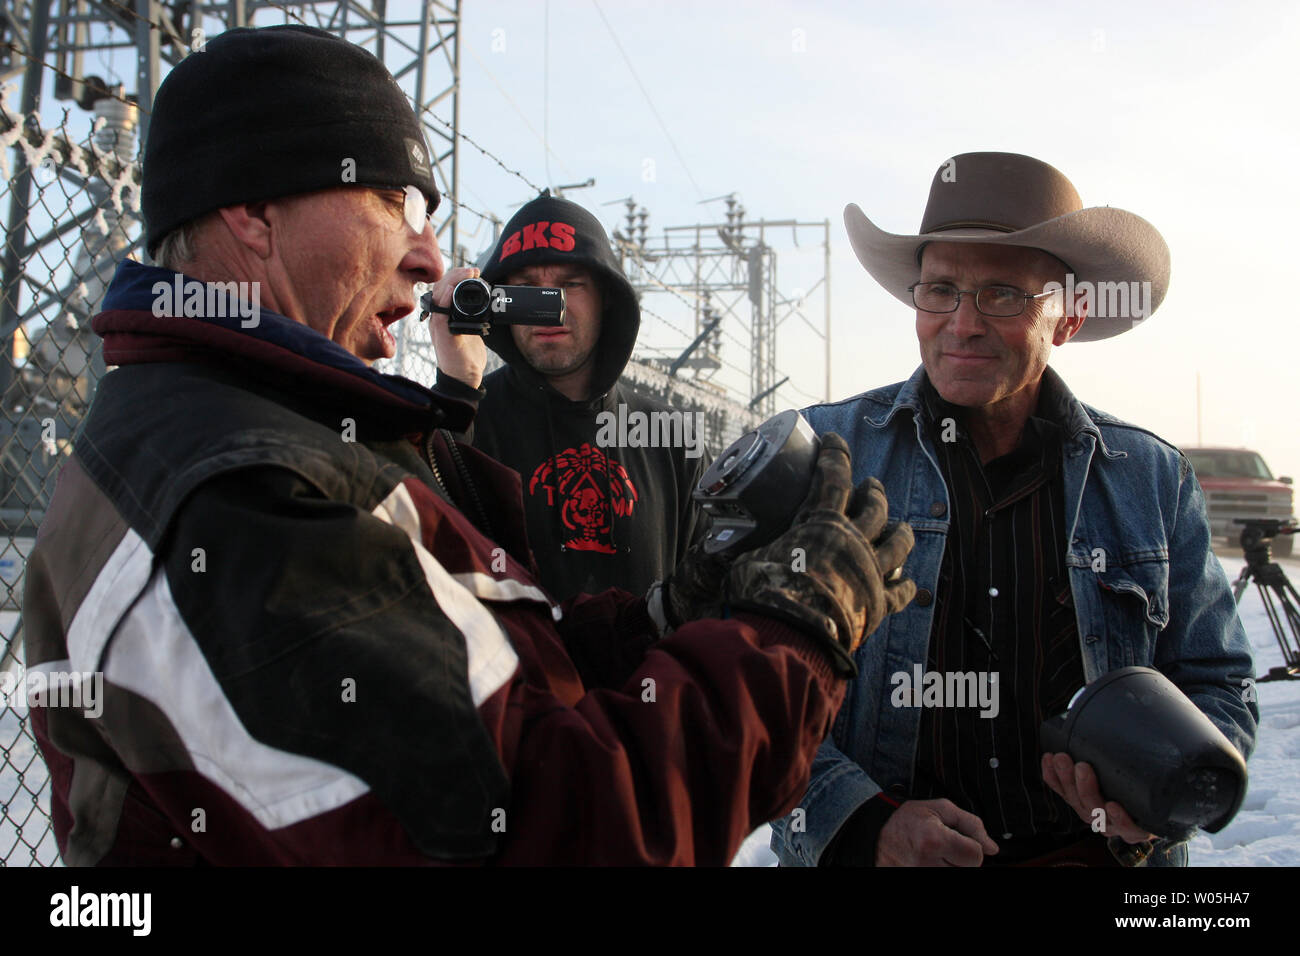 Activists Stuart Wellingham, left,  reads off the ISBM numbers to one of two FBI surveillance cameras found at a power station near the Malheur National Wildlife Reserve on January 15, 2016 in Burns, Oregon.  Ammon Bundy and about 20 other protesters took over the refuge on Jan. 2 after a rally to support the imprisoned local ranchers Dwight Hammond Jr., and his son, Steven Hammond. Another surveillance camera was found near the reserve.    Photo by Jim Bryant/UPI Stock Photo